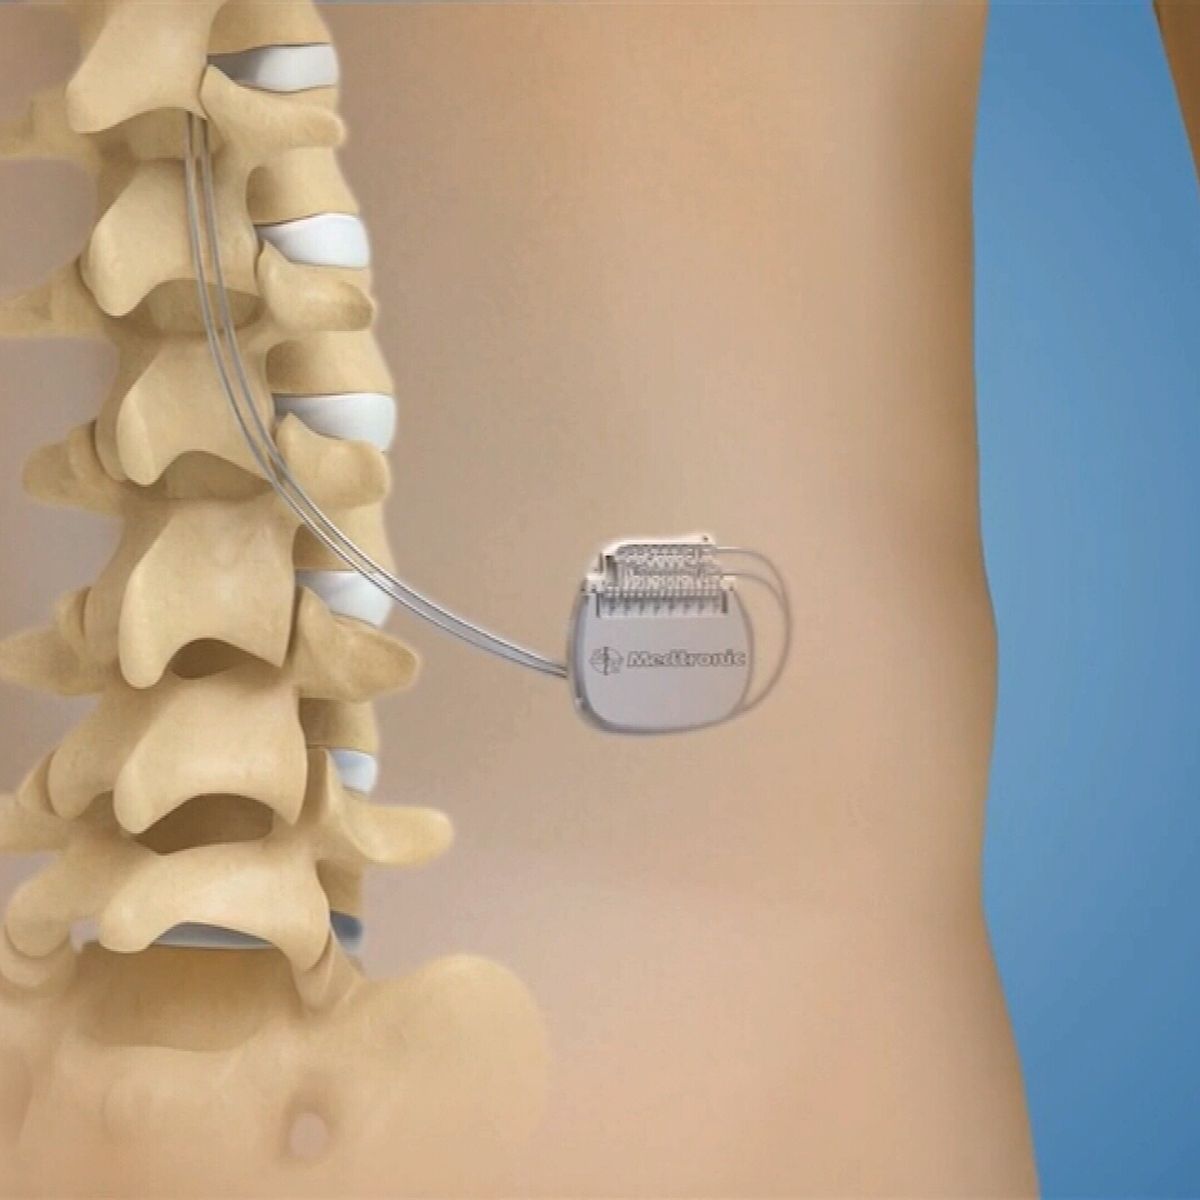 Lower back pain now treated by implantable nerve stimulation device -  UCHealth Today